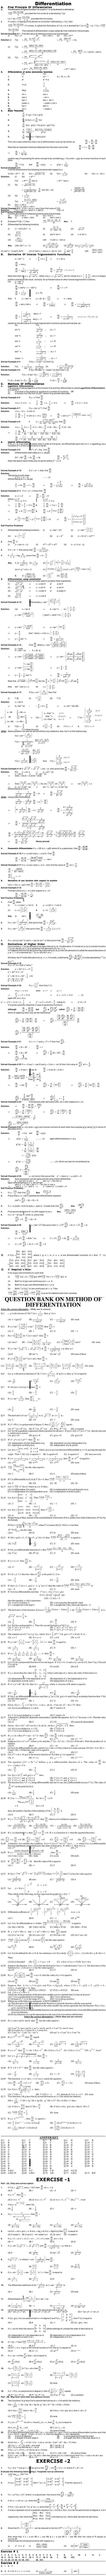 Maths Study Material - Chapter 12